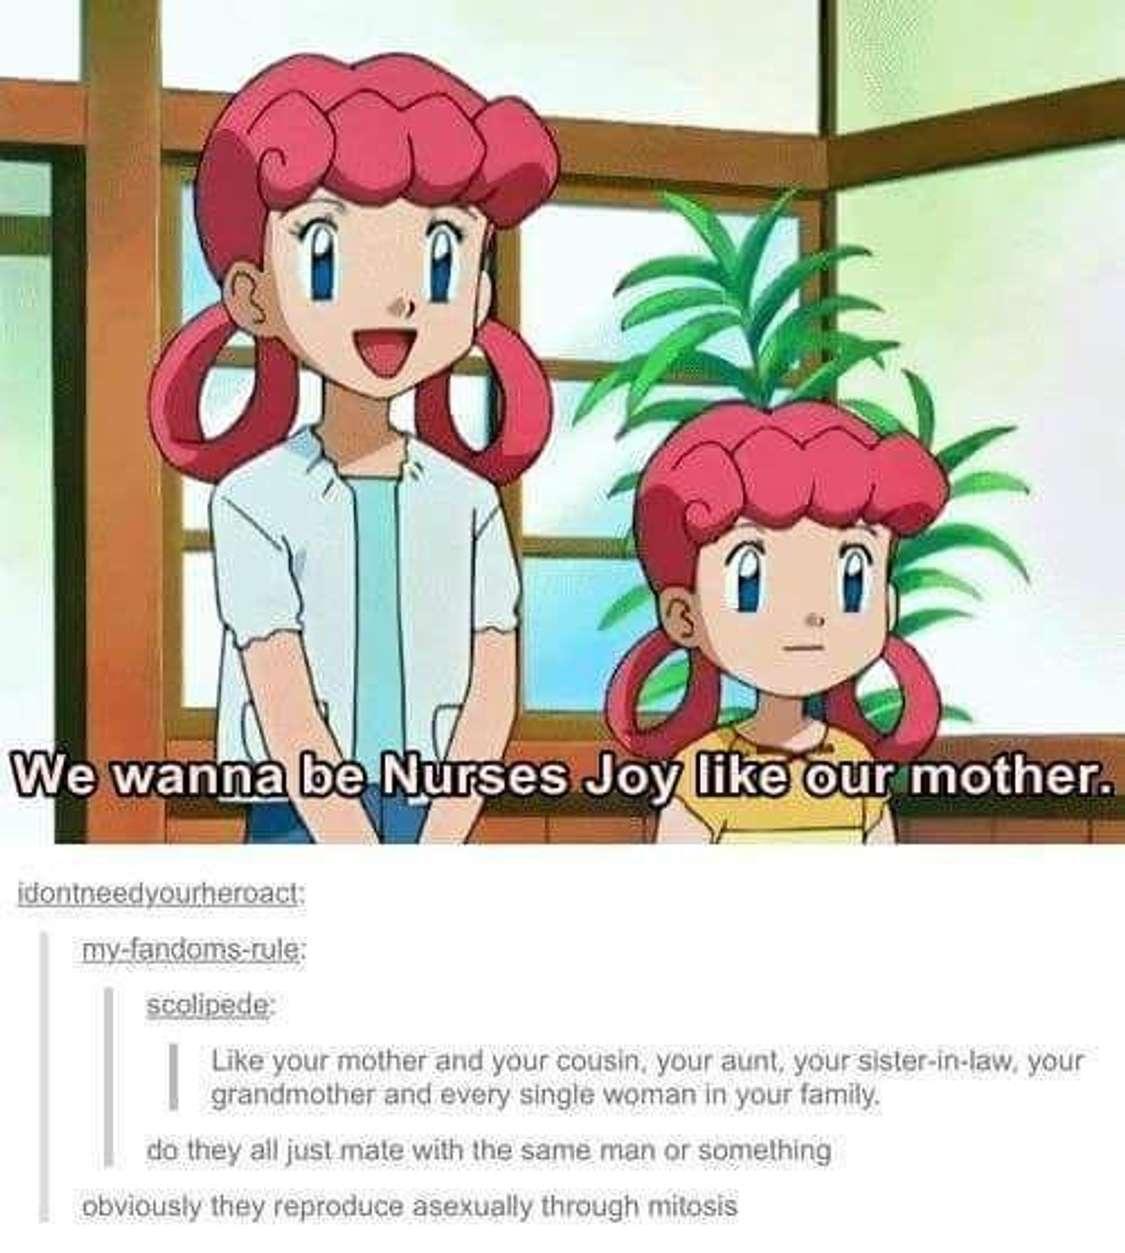 funny pics - funny memes - pokemon nurse joy memes - We wanna be Nurses Joy our mother. idontneedyourheroact myfandomsrule scolipede your mother and your cousin, your aunt, your sisterinlaw, your grandmother and every single woman in your family. do they 